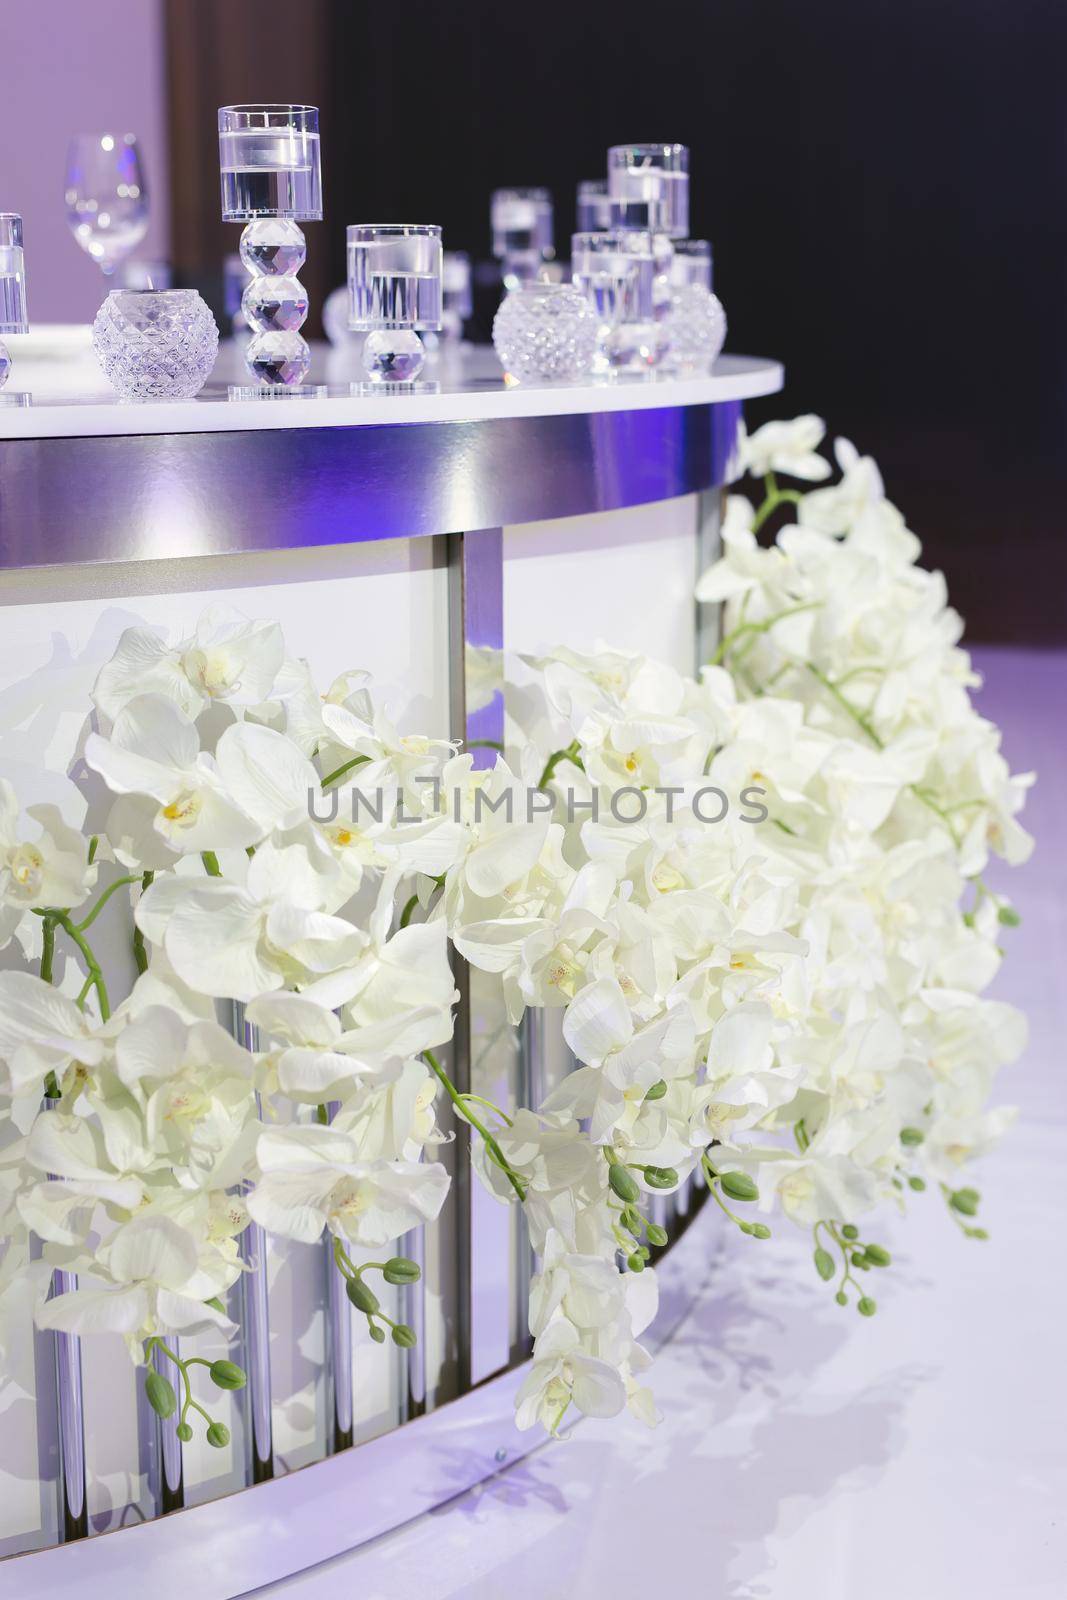 The table of the bride and groom at the wedding, decorated with orchids.